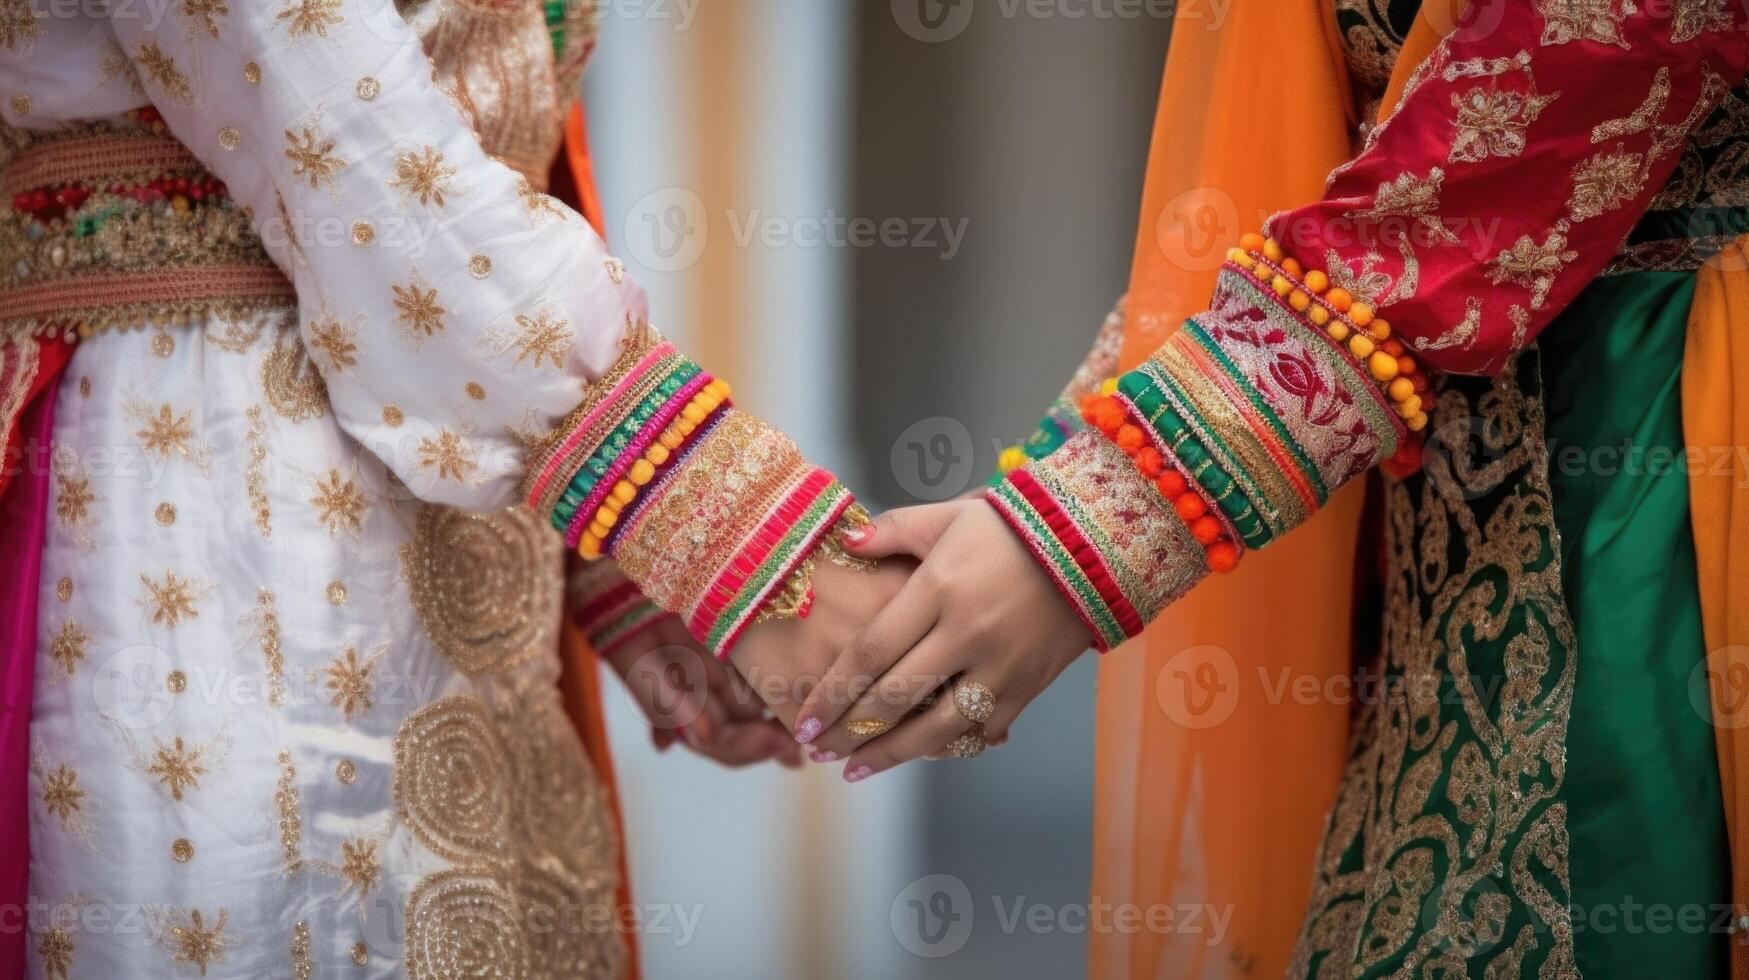 Cropped Image of Friendly or Casual Handshake Between Arabic Women in their Traditional Attire. photo